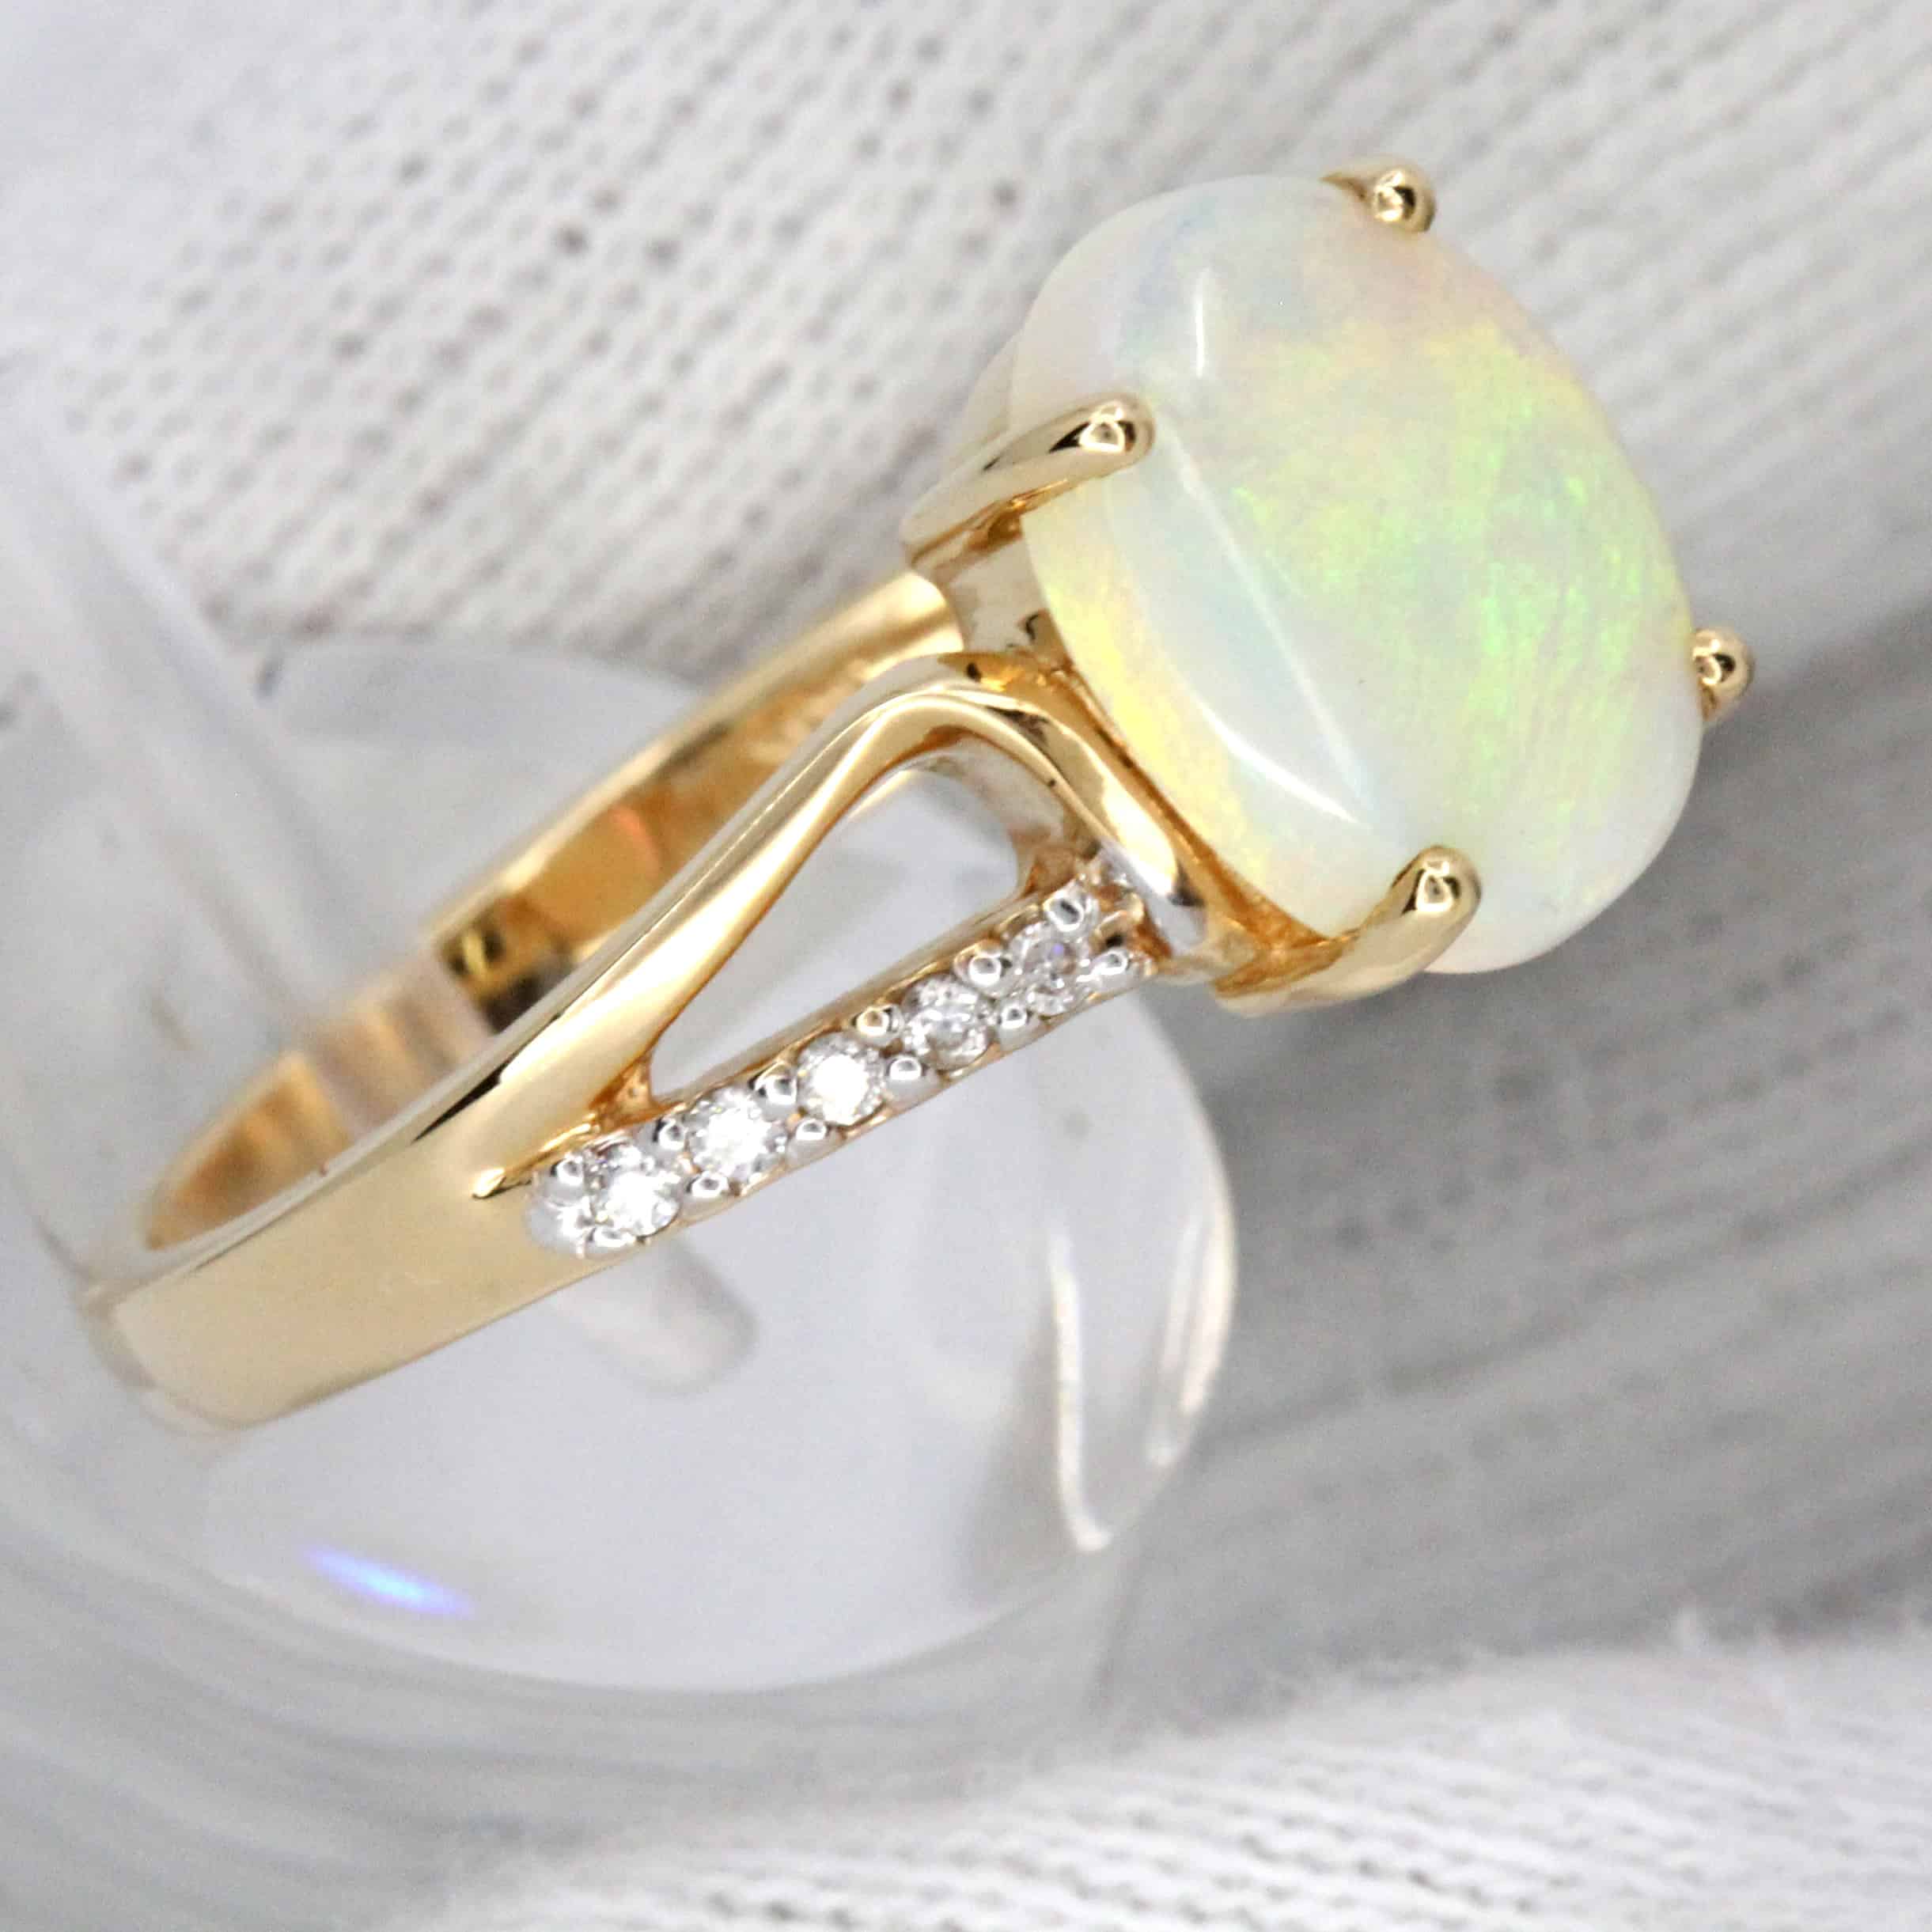 White Opal Ring with Diamond Accents Set in 14ct Yellow Gold Allgem